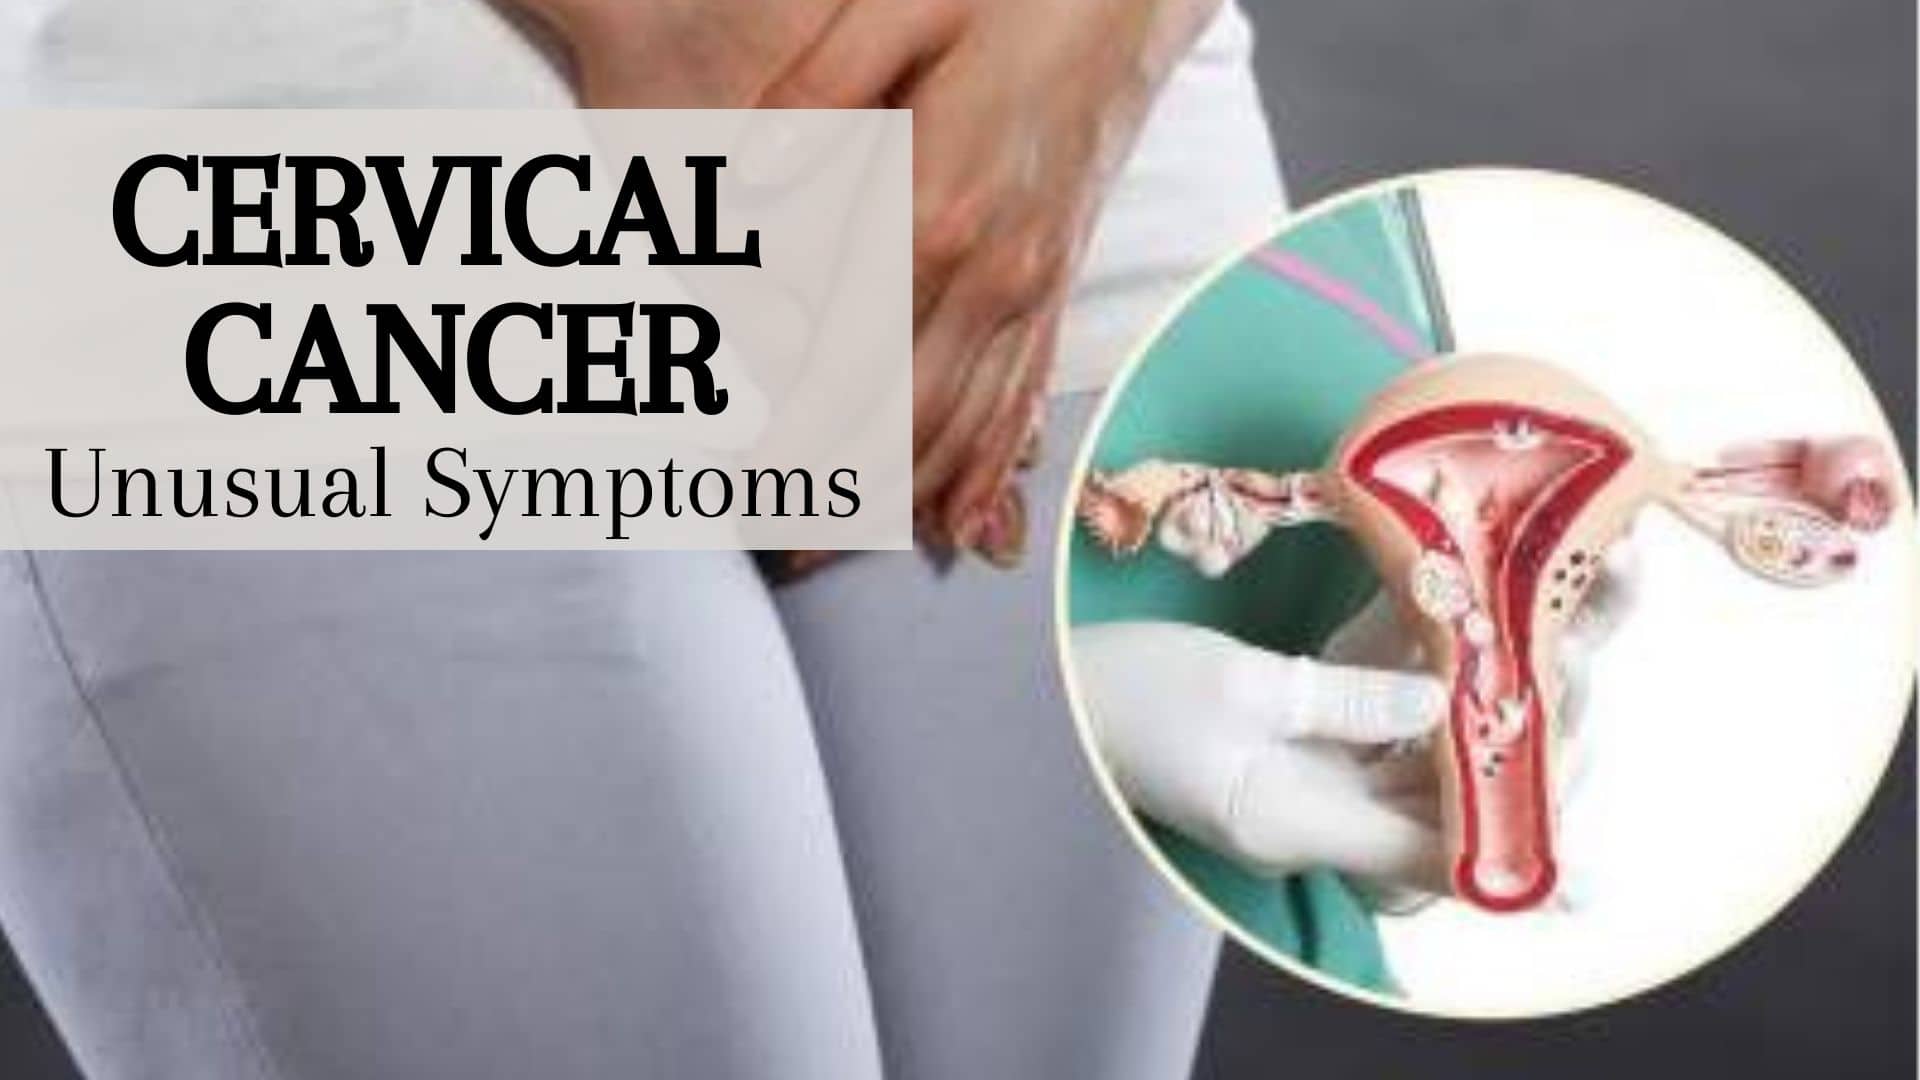 LeedsHealthAwareness on X: If you experience any potential symptoms of  #cervicalcancer e.g. vaginal bleeding that is unusual for you or changes to vaginal  discharge, speak to your GP. Symptoms are often caused